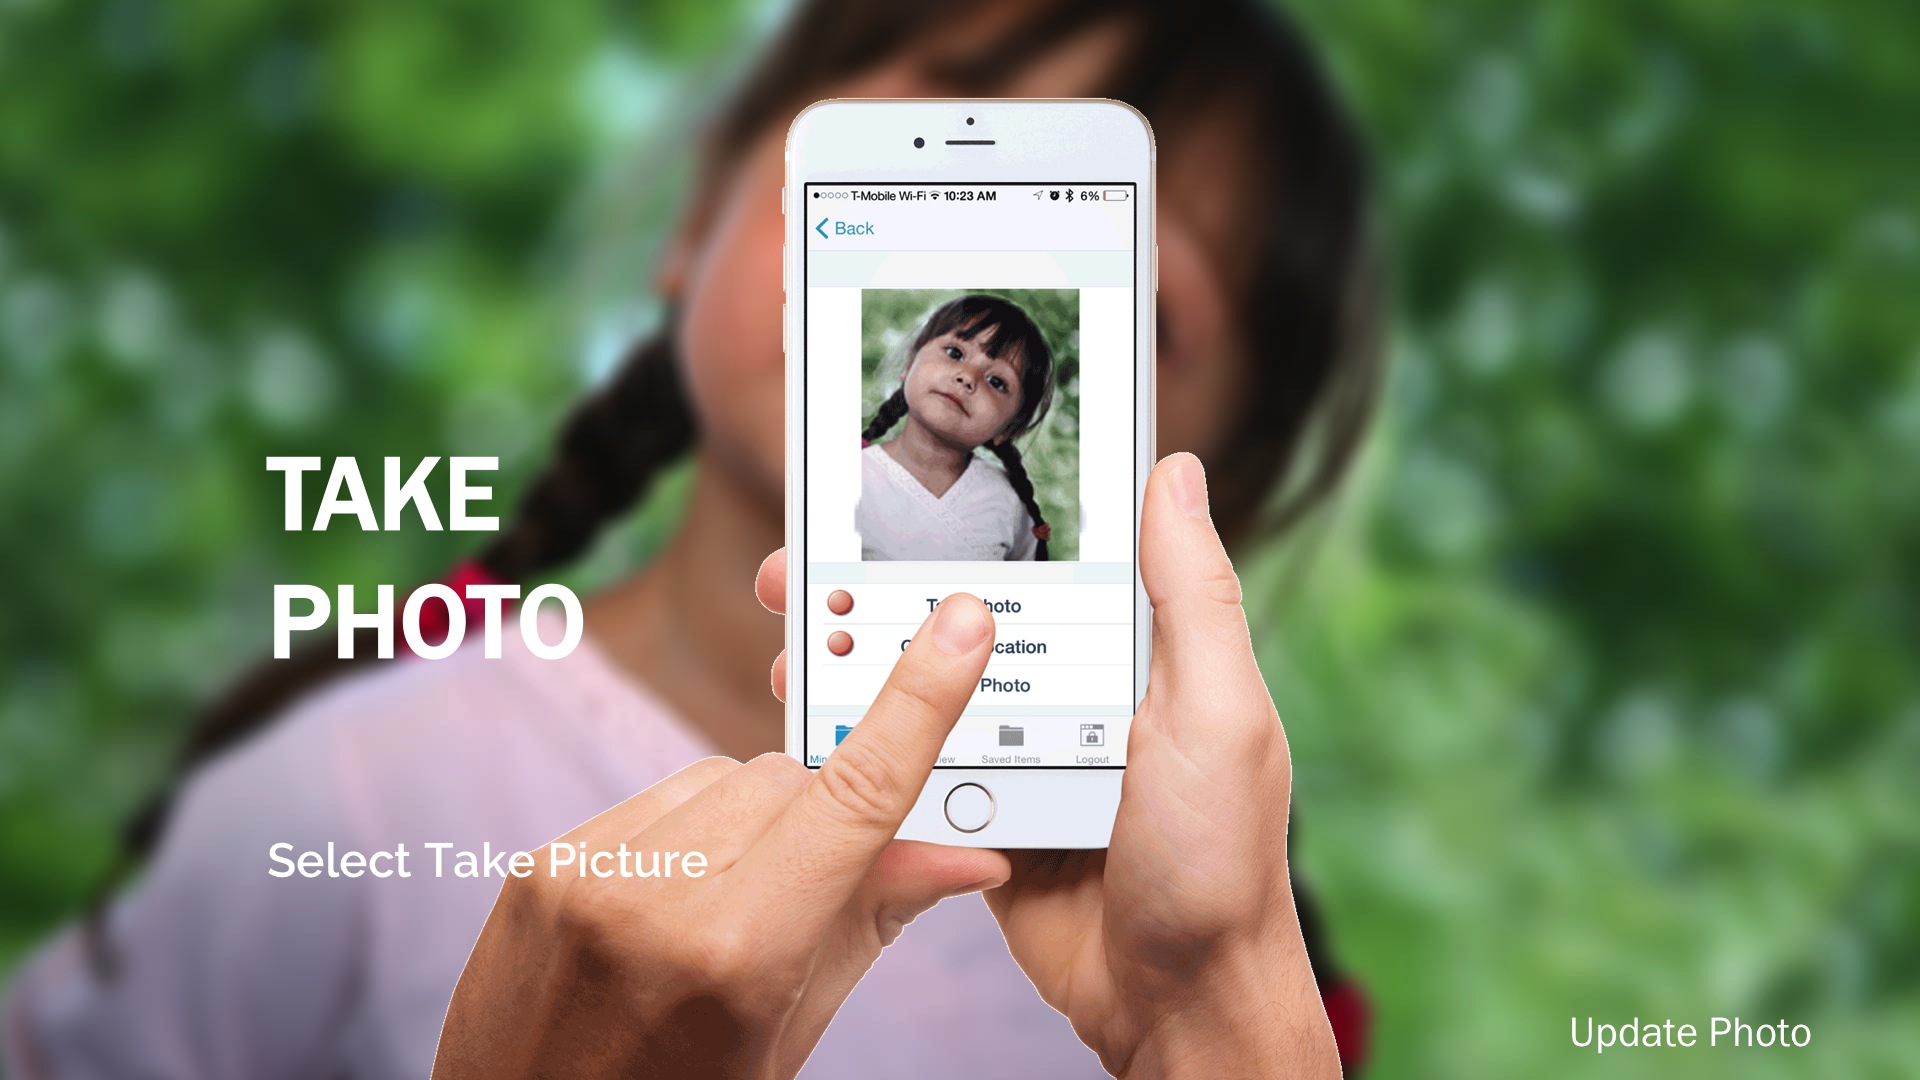 How To Update a Photo in the Caseworker iOS Mobile App